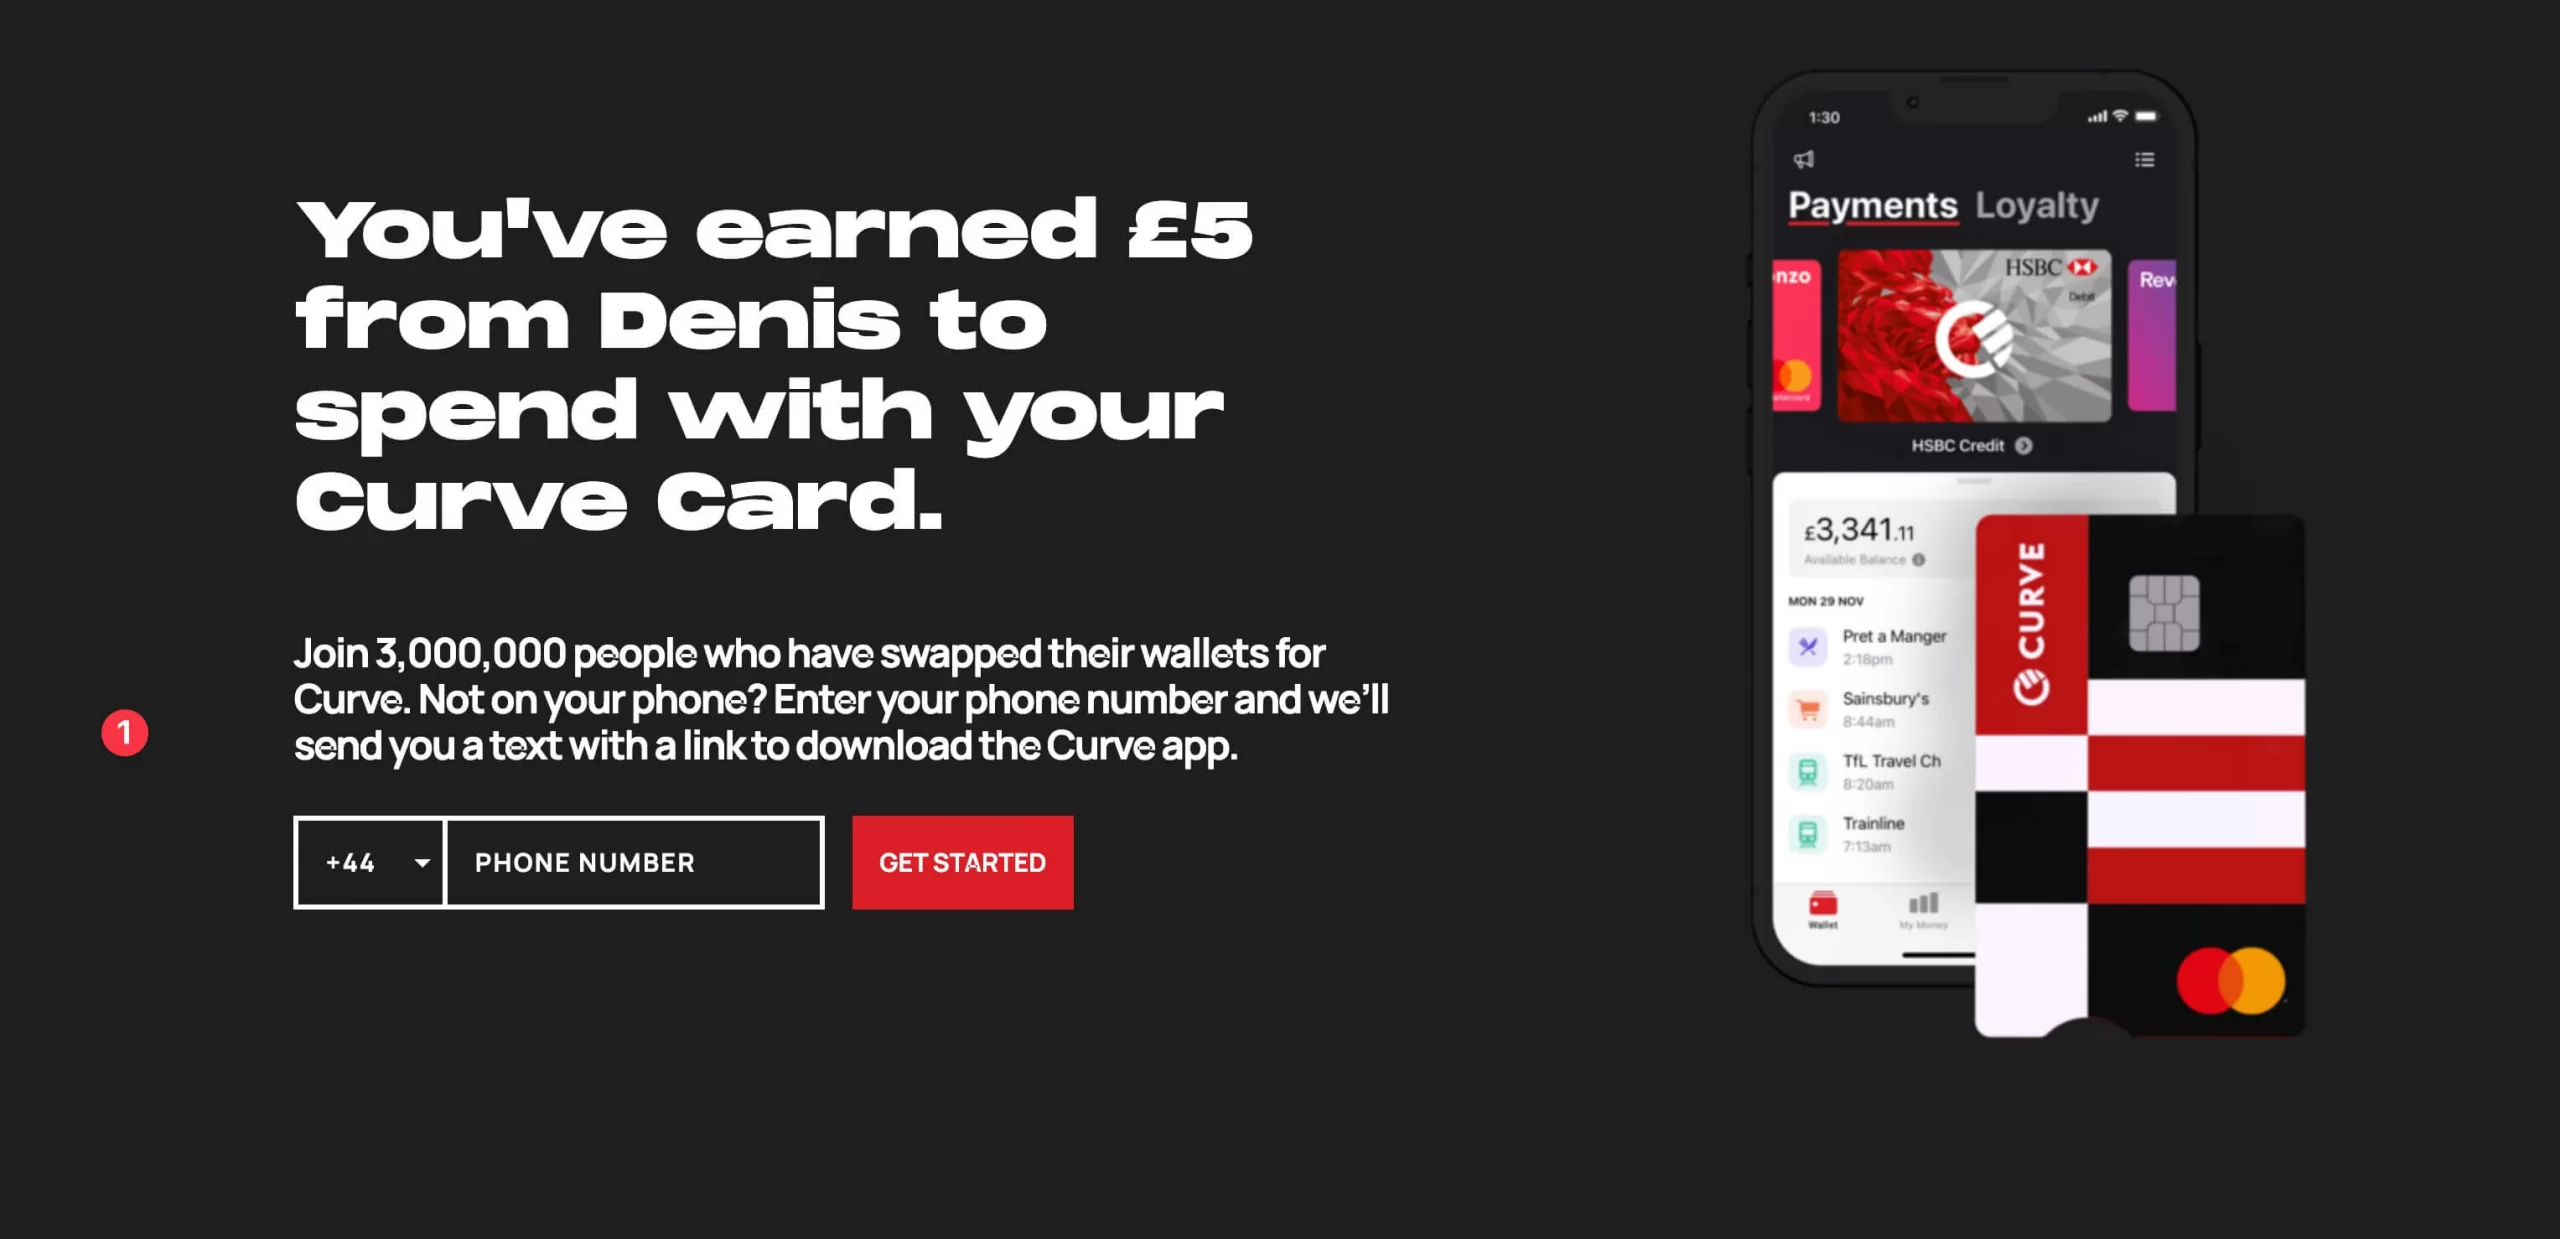 Curve app sign up bonus - get 5GBP when you use your card